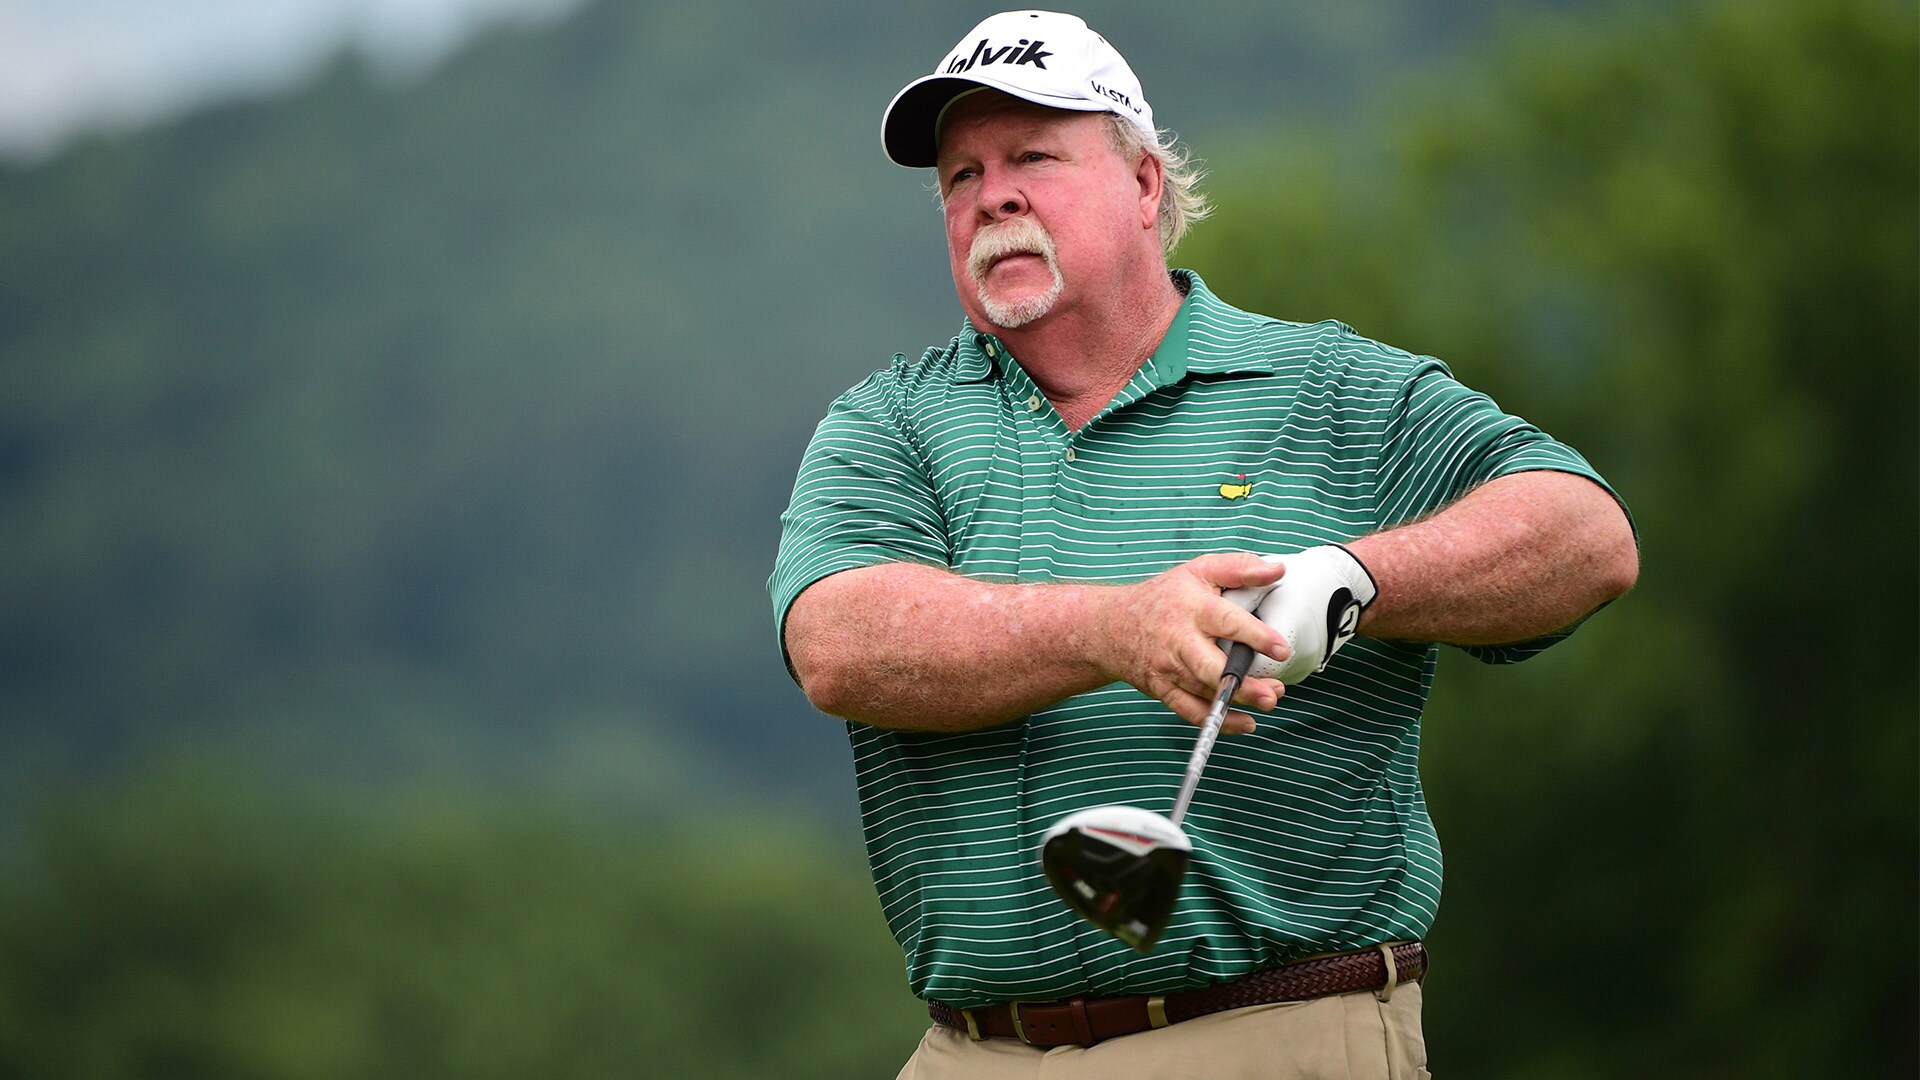 Watch: Masters champion Craig Stadler aces 169-yard hole with a driver in charity event